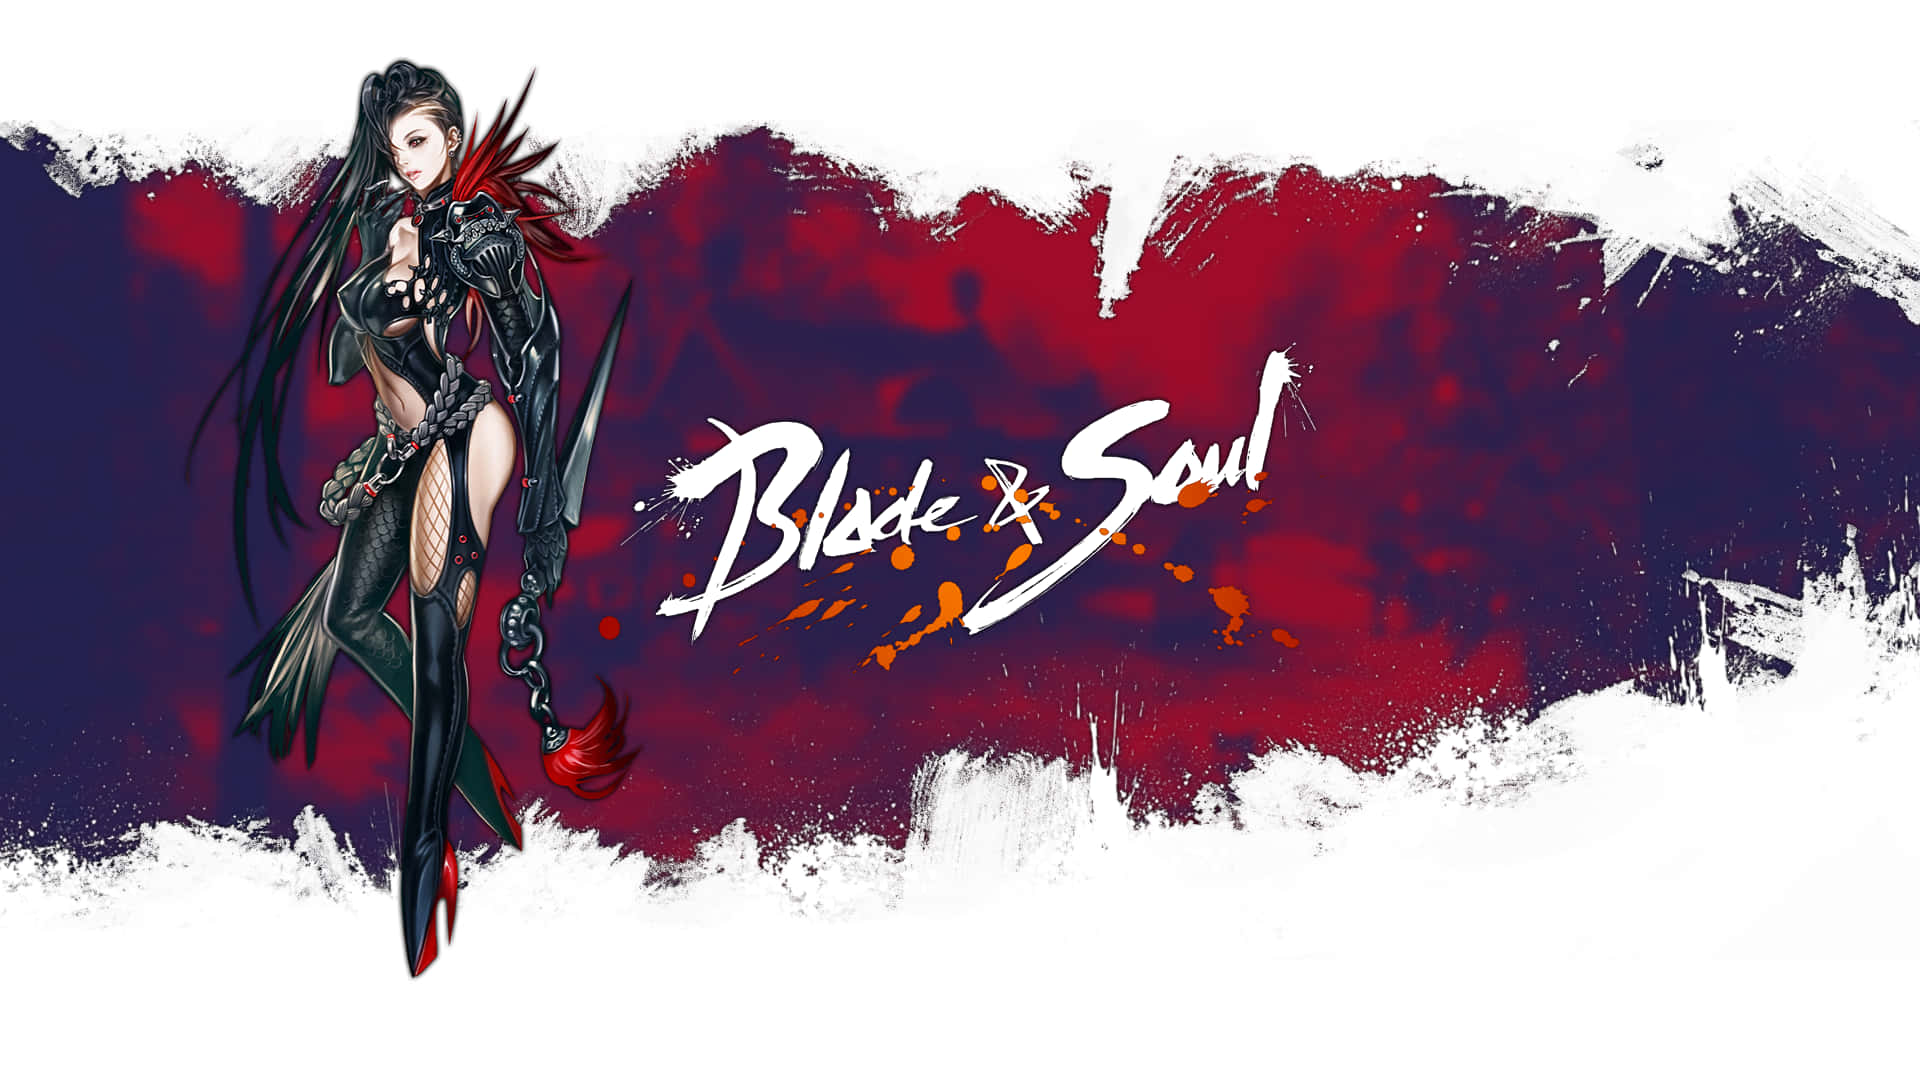 Join the Adventure and Exploit the Thrills of Blade and Soul Wallpaper